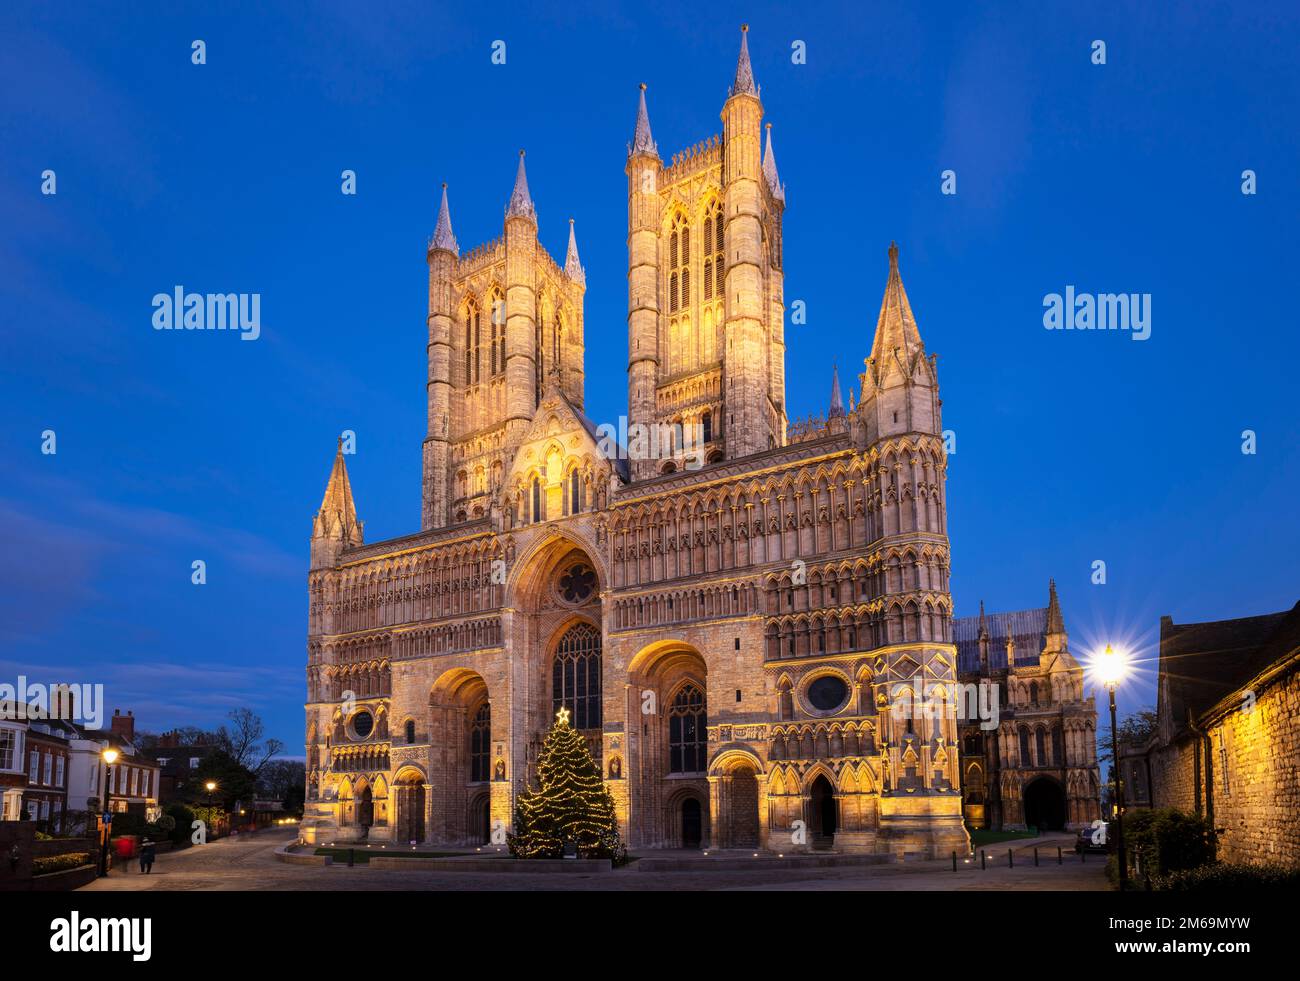 Lincoln Cathedral Lincoln Minster West Front beleuchtet am Night Minster Yard Lincoln Cathedral uk lincoln uk Lincoln Lincolnshire England GB GB GB Europa Stockfoto